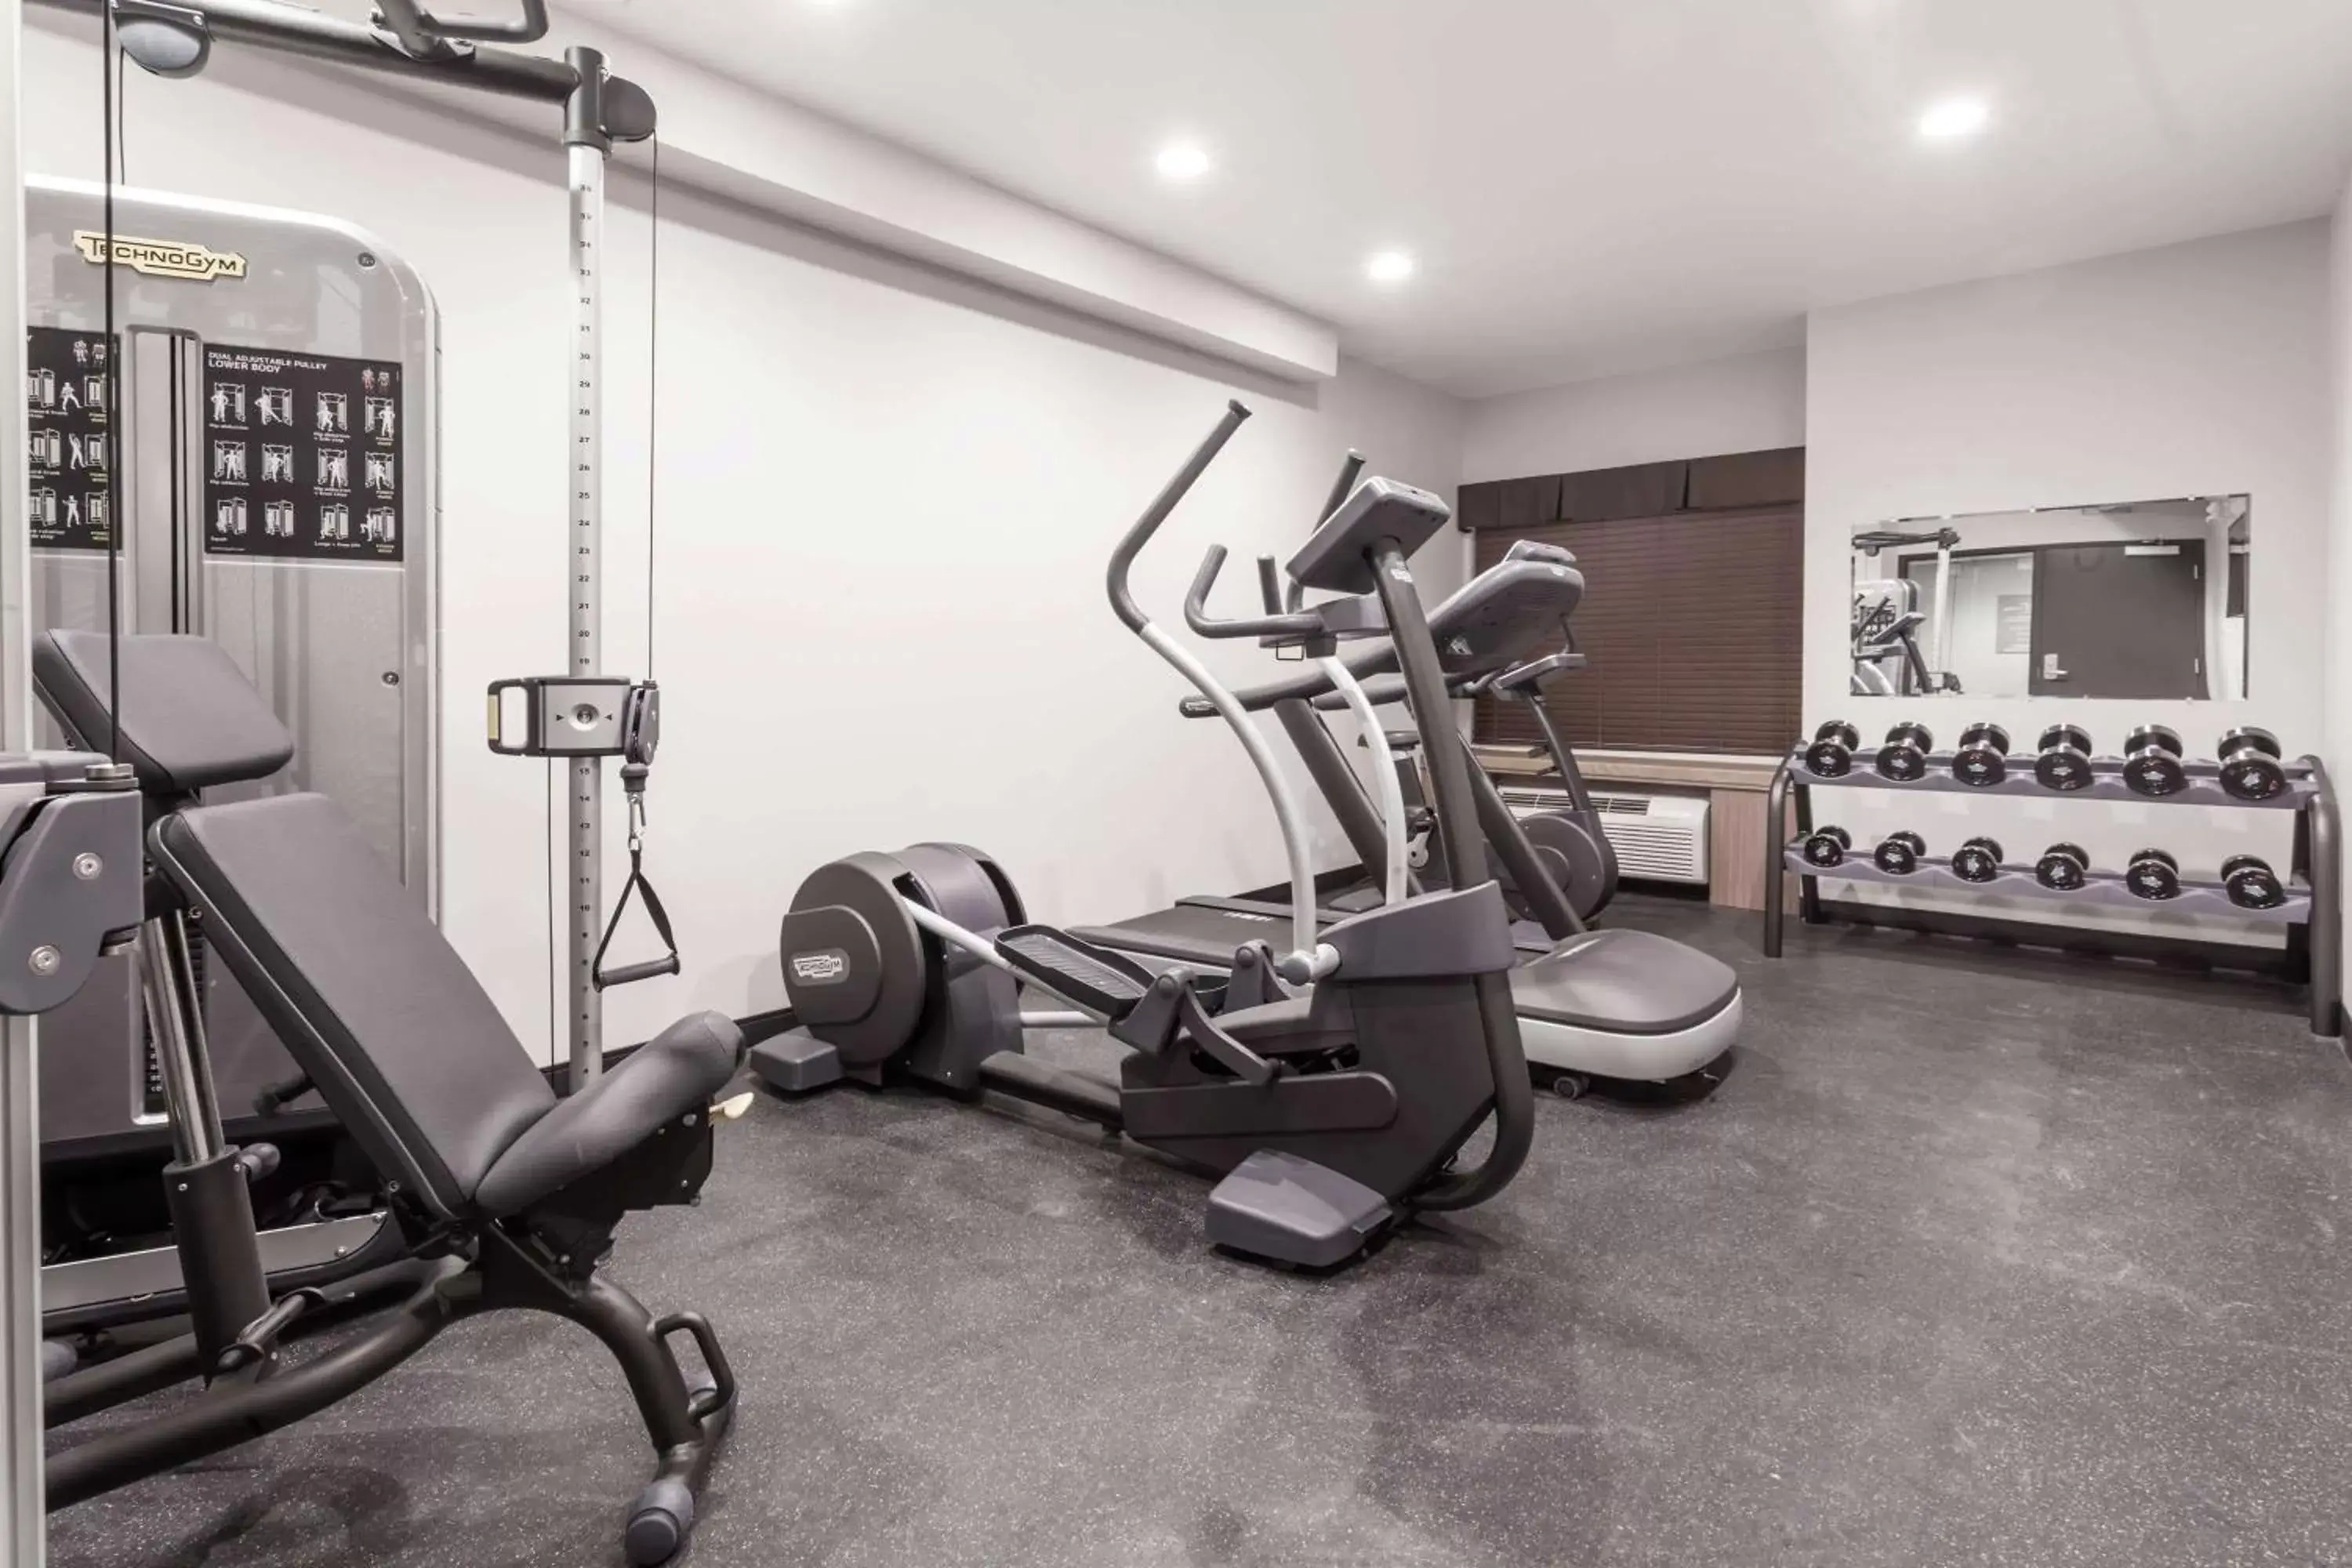 Fitness centre/facilities, Fitness Center/Facilities in Microtel Inn & Suites by Wyndham Kirkland Lake